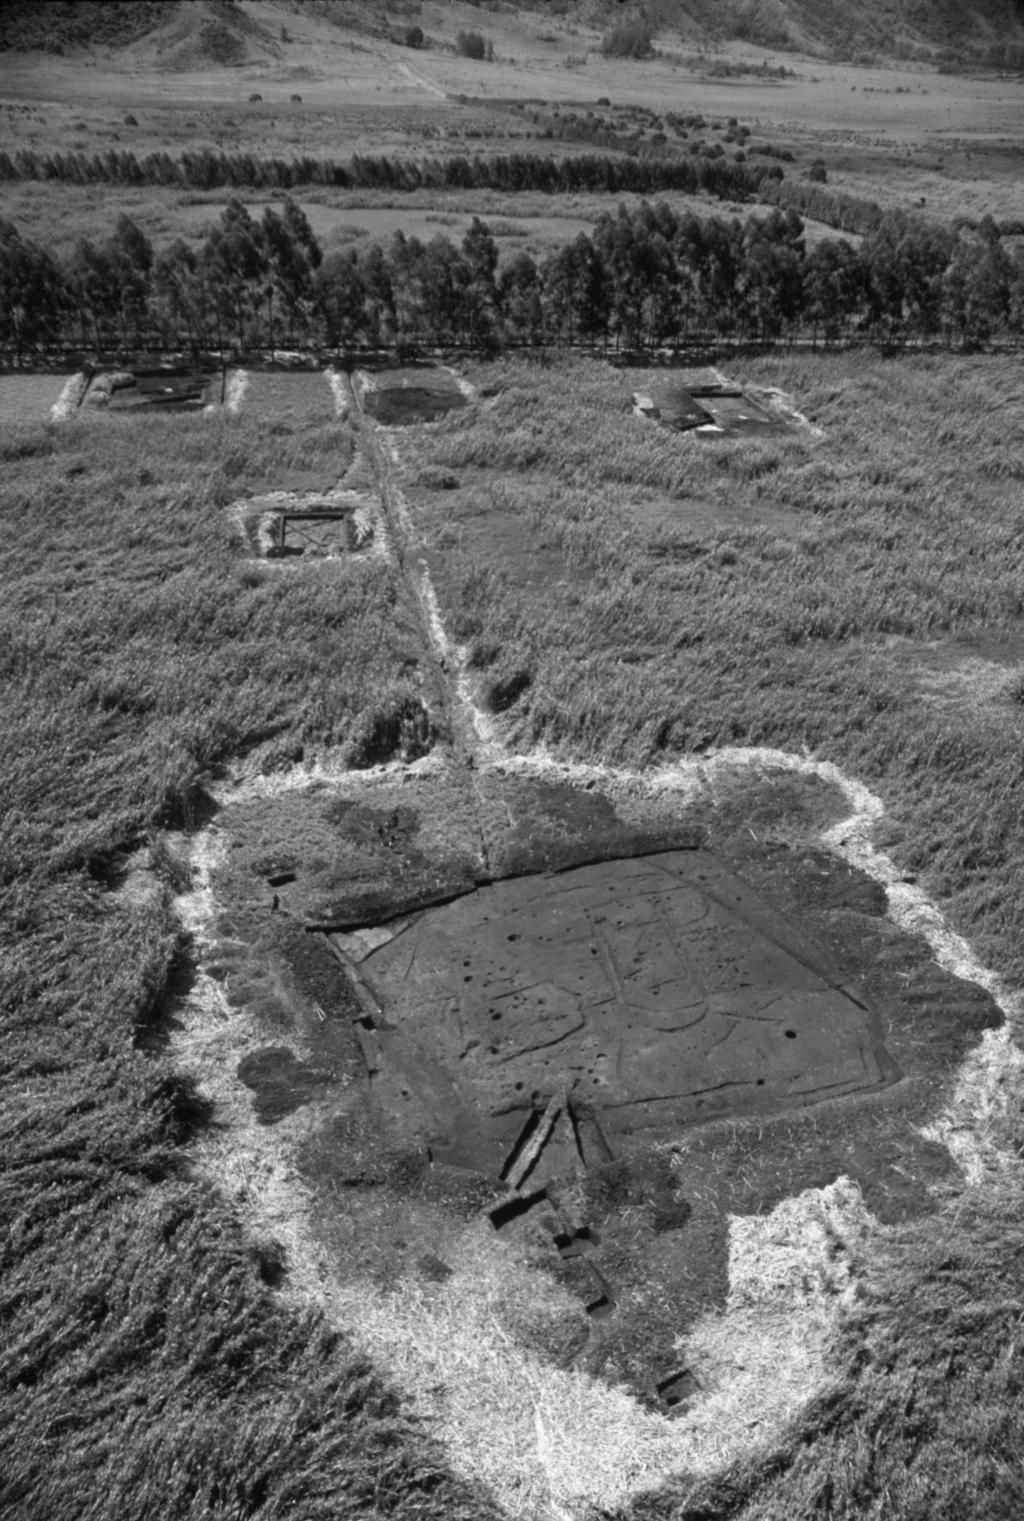 Landscape and meaning 33 Figure 2.2 Kuk early agricultural site Papua New Guinea. Source: J. Golson.